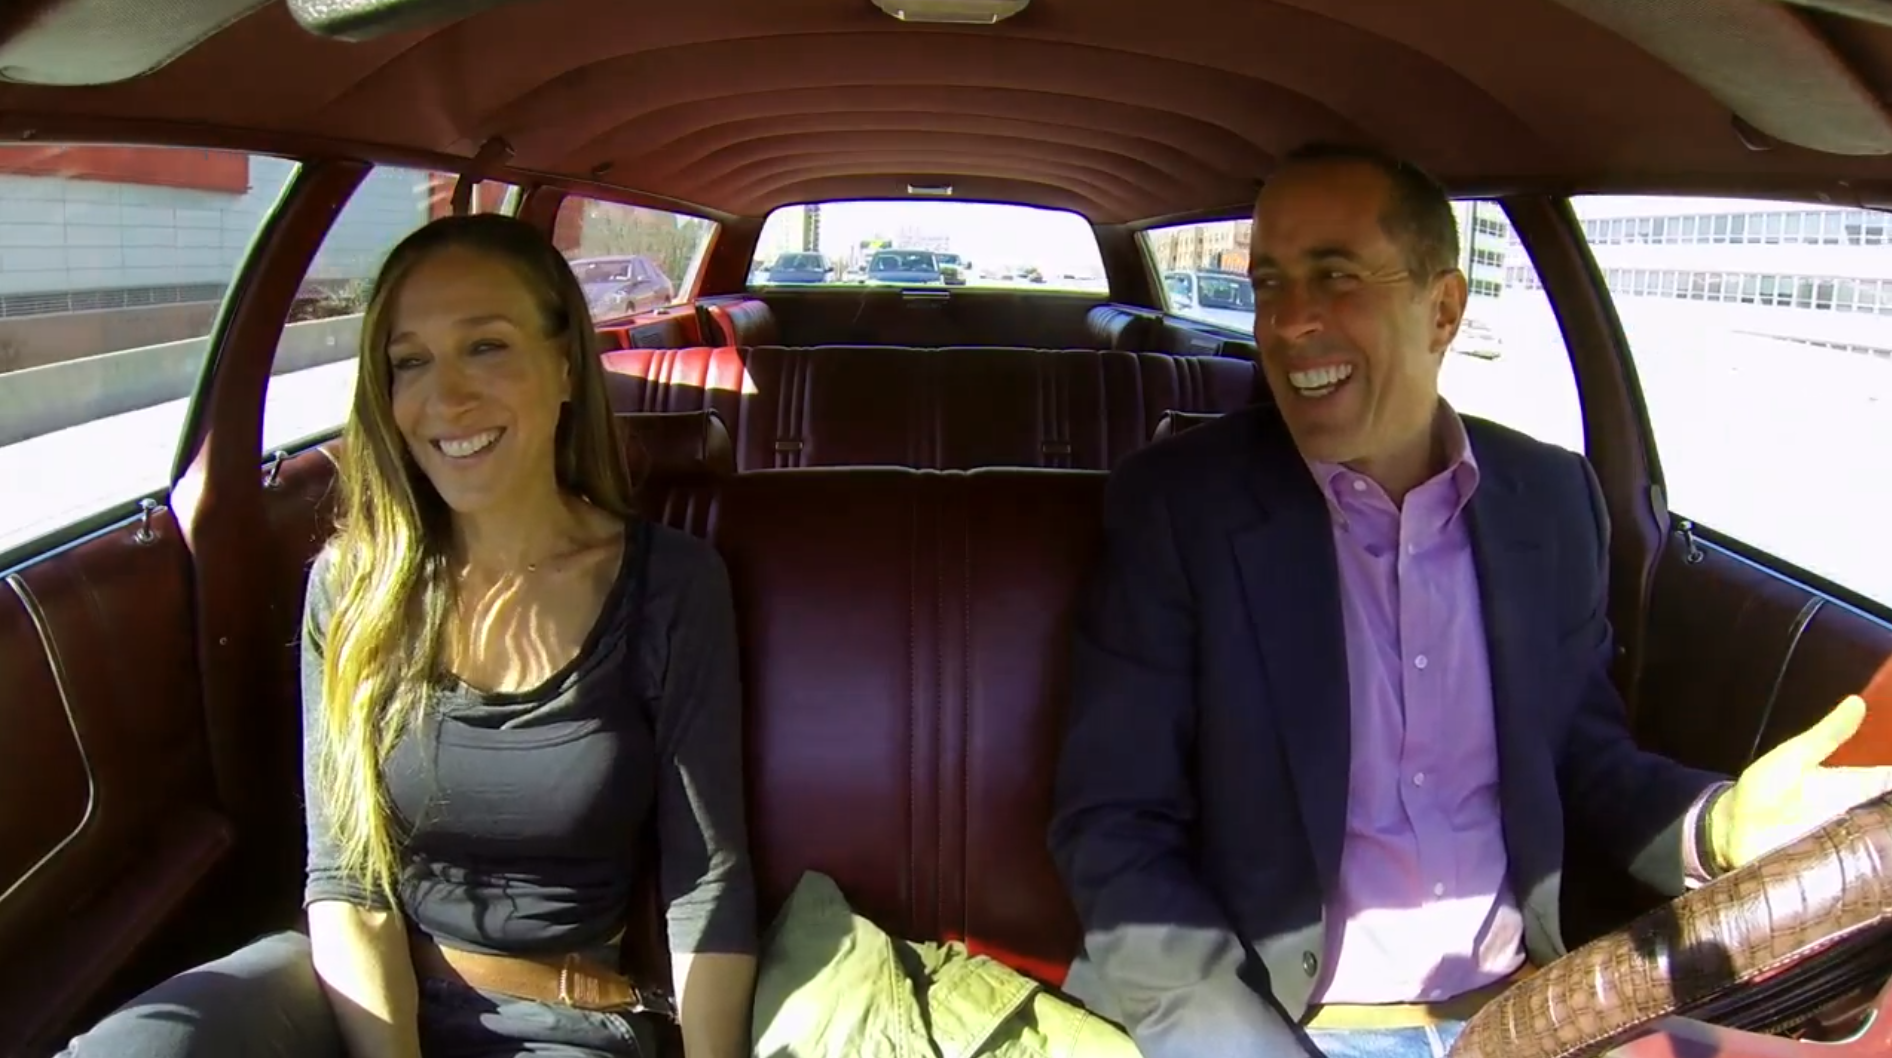 He got a new car. Comedians in cars getting Coffee. Джерри Форд жена. Comedians in cars getting Coffee Sarah Jessica Parker. Take car and get a car разница.